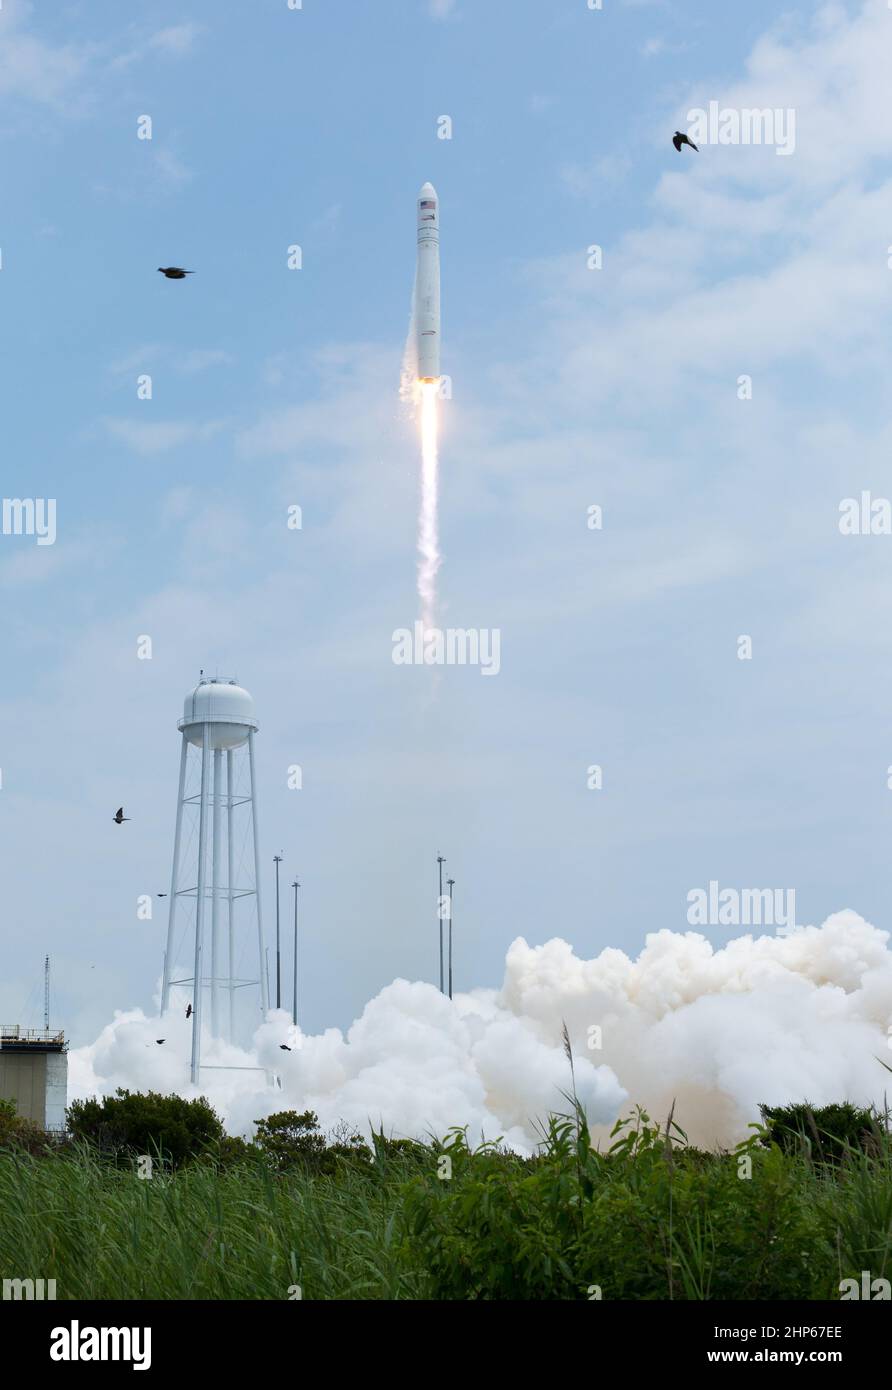 The Orbital Sciences Corporation Antares rocket launches from Pad-0A with the Cygnus spacecraft onboard, Sunday, July 13, 2014, at NASA's Wallops Flight Facility in Virginia. Stock Photo